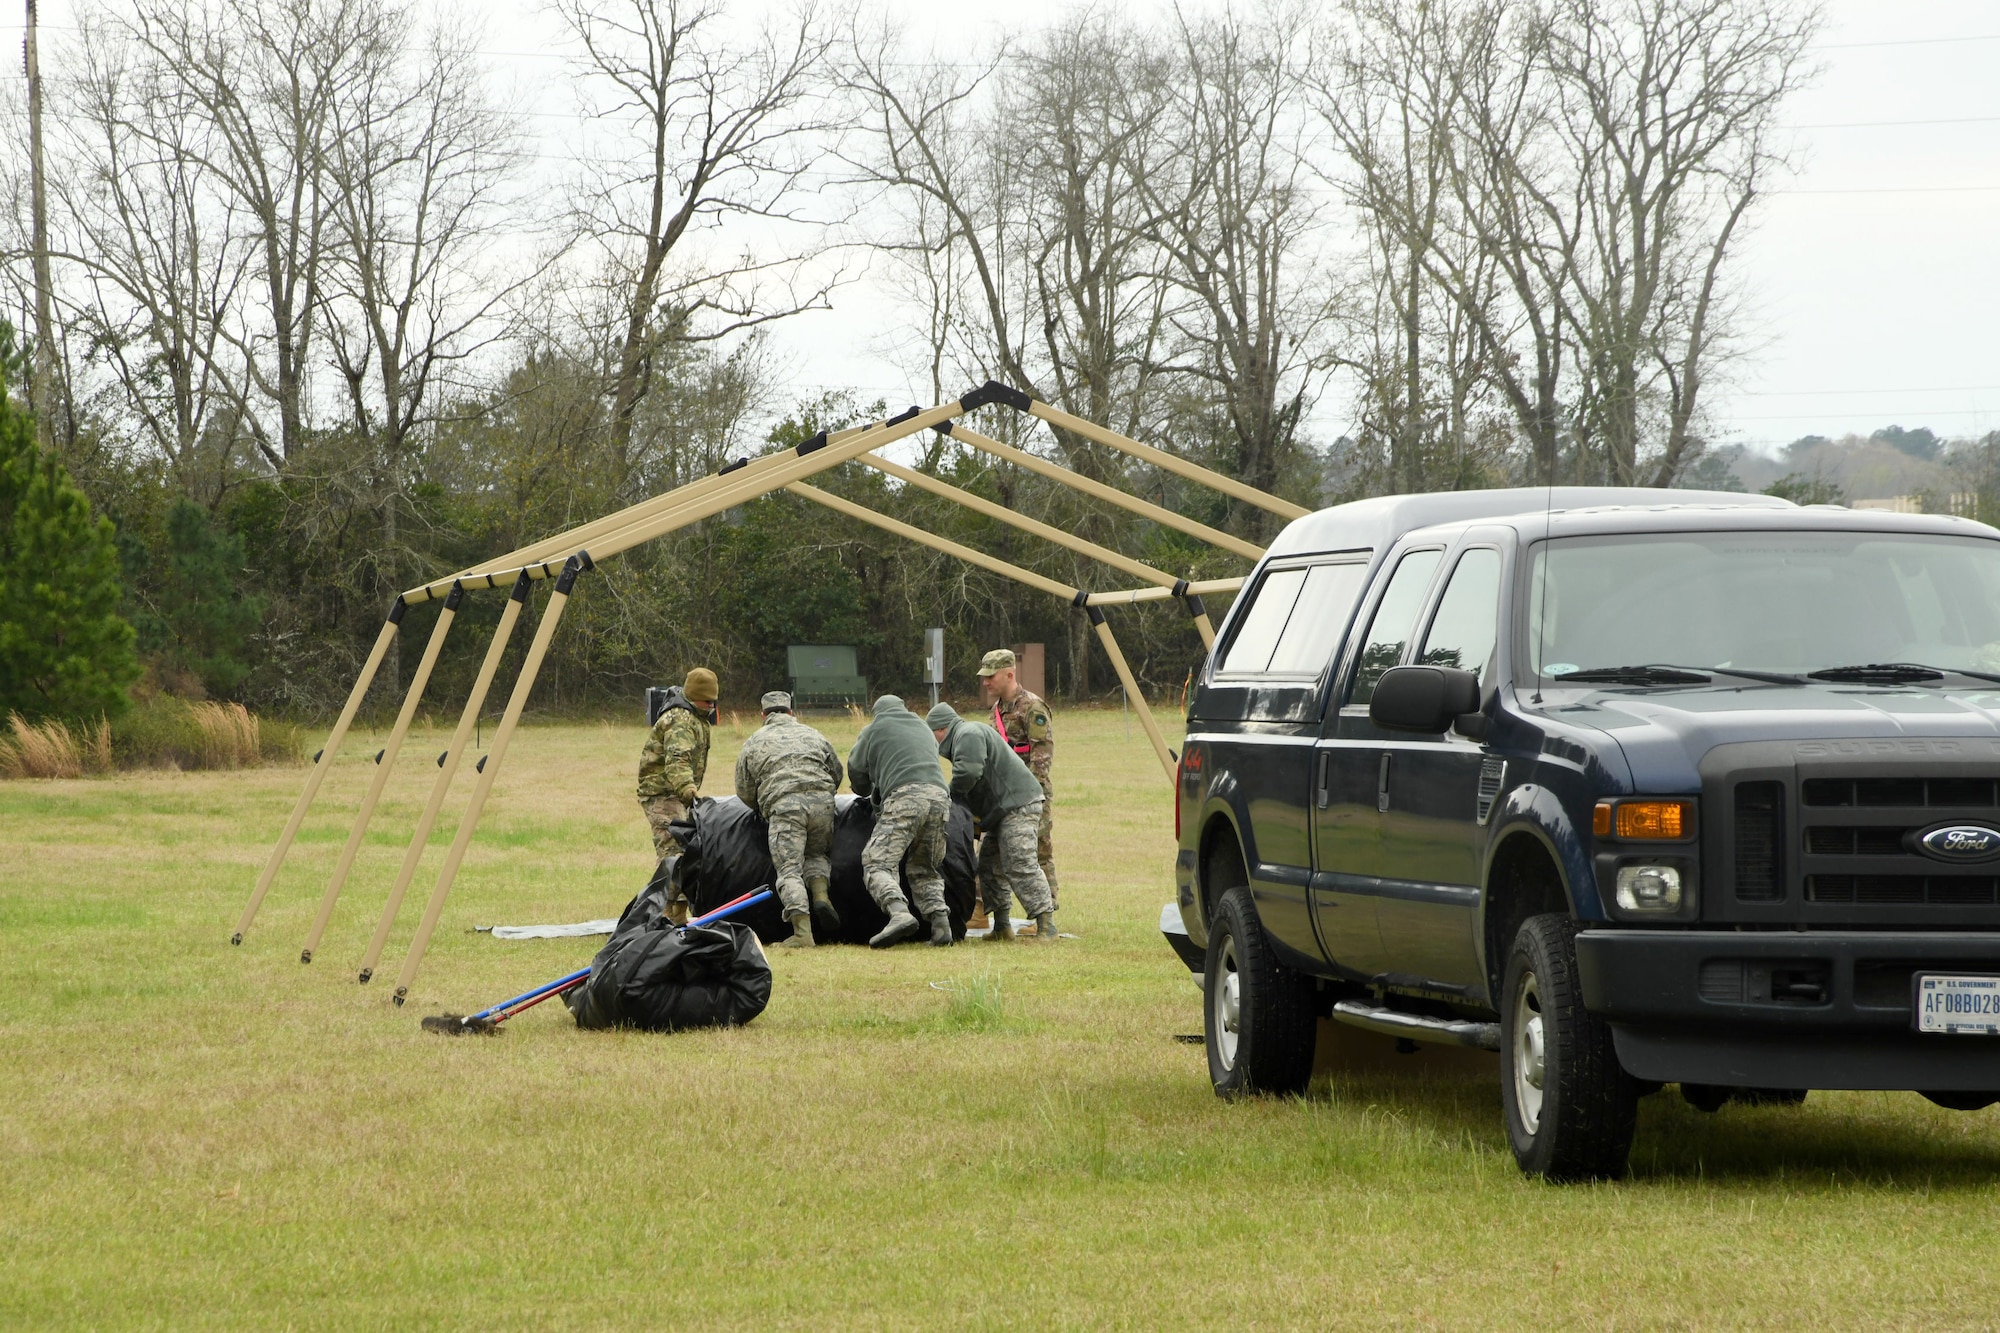 A mobile deployment tent erected is erected by members of the 263rd Combat Communications Squadron for their participation in the Combat Communications (CBC) Rodeo while at Robins Air Force Base, Georgia, Mar. 4, 2019. The CBC Rodeo is a Nationwide training exercise that brings together Combat Communications Squadrons from across the country to train in techniques and skills while networking to increase the potential success of future deployments.